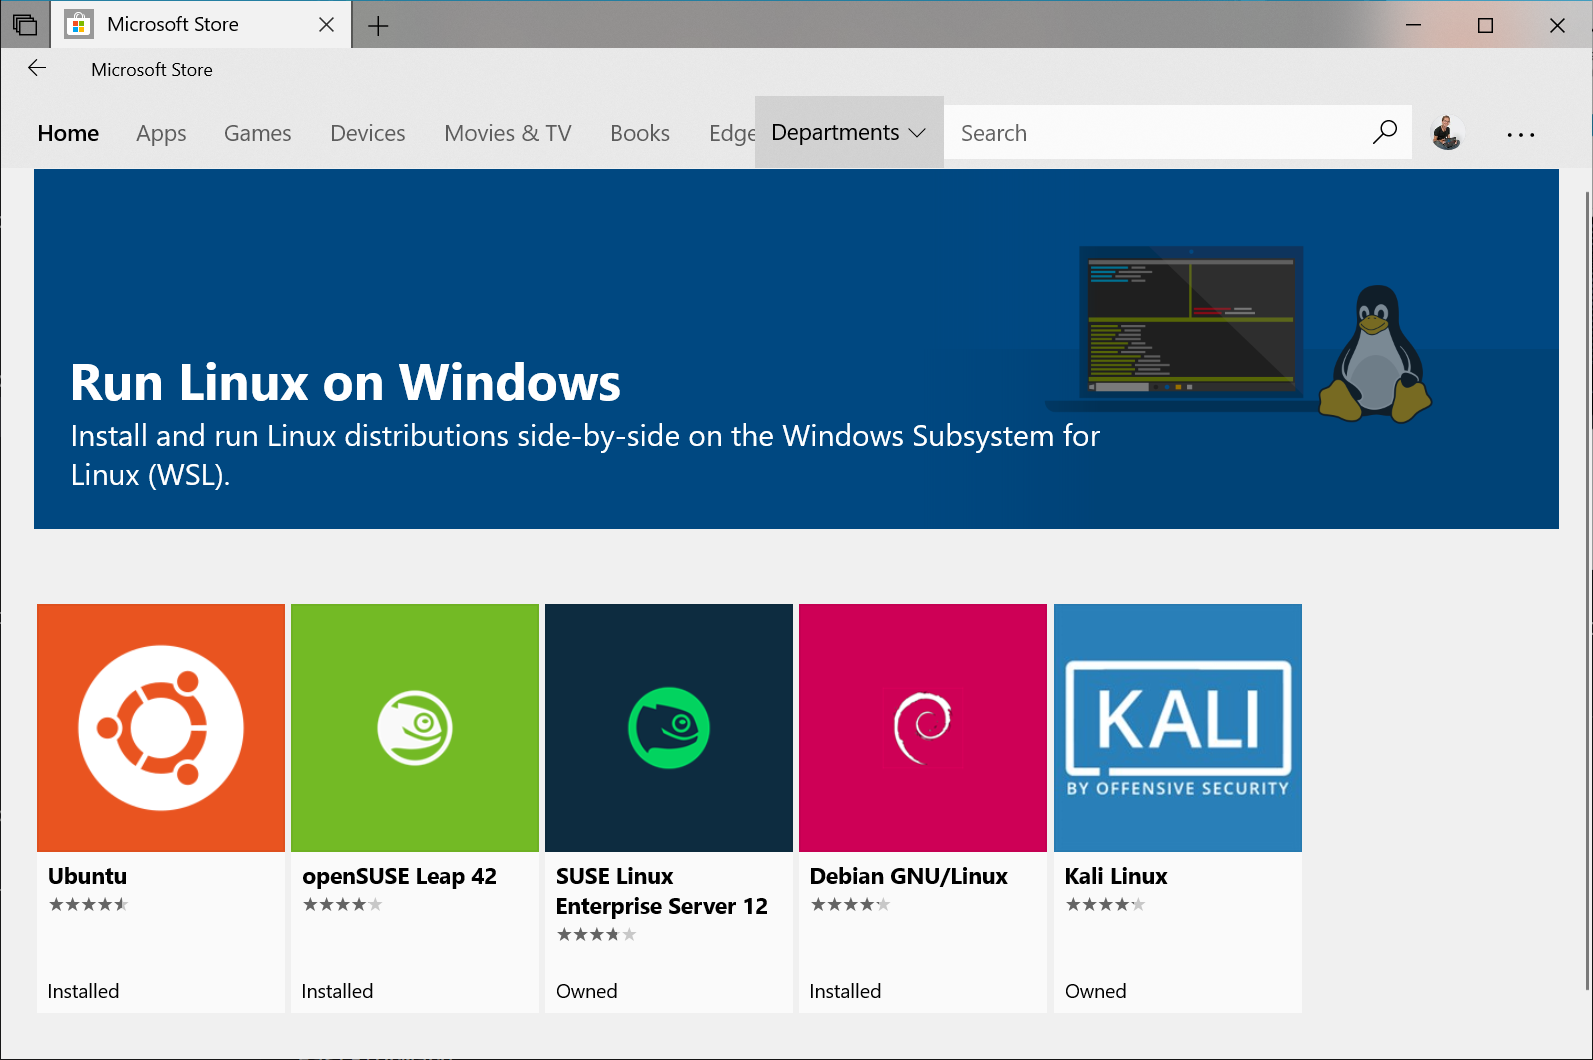 Some Linux distributions available on Windows store (Ubuntu, SuSE, Kali, etc.)